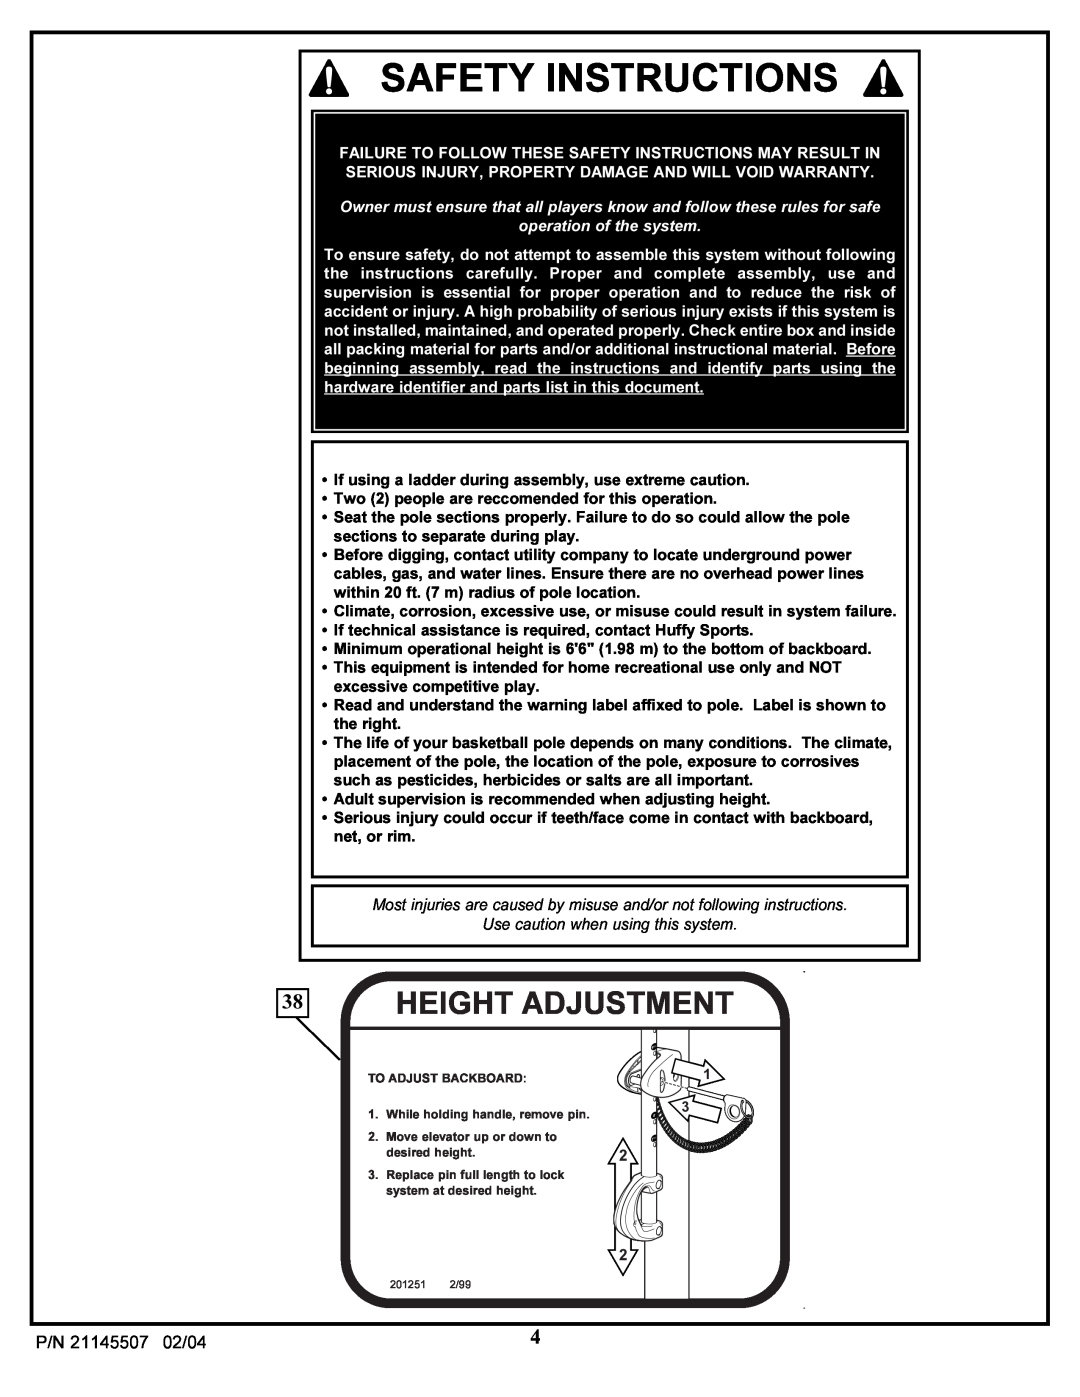 Huffy Sports Basketball Systems manual Safety Instructions, Height Adjustment, P/N 21145507 02/04 